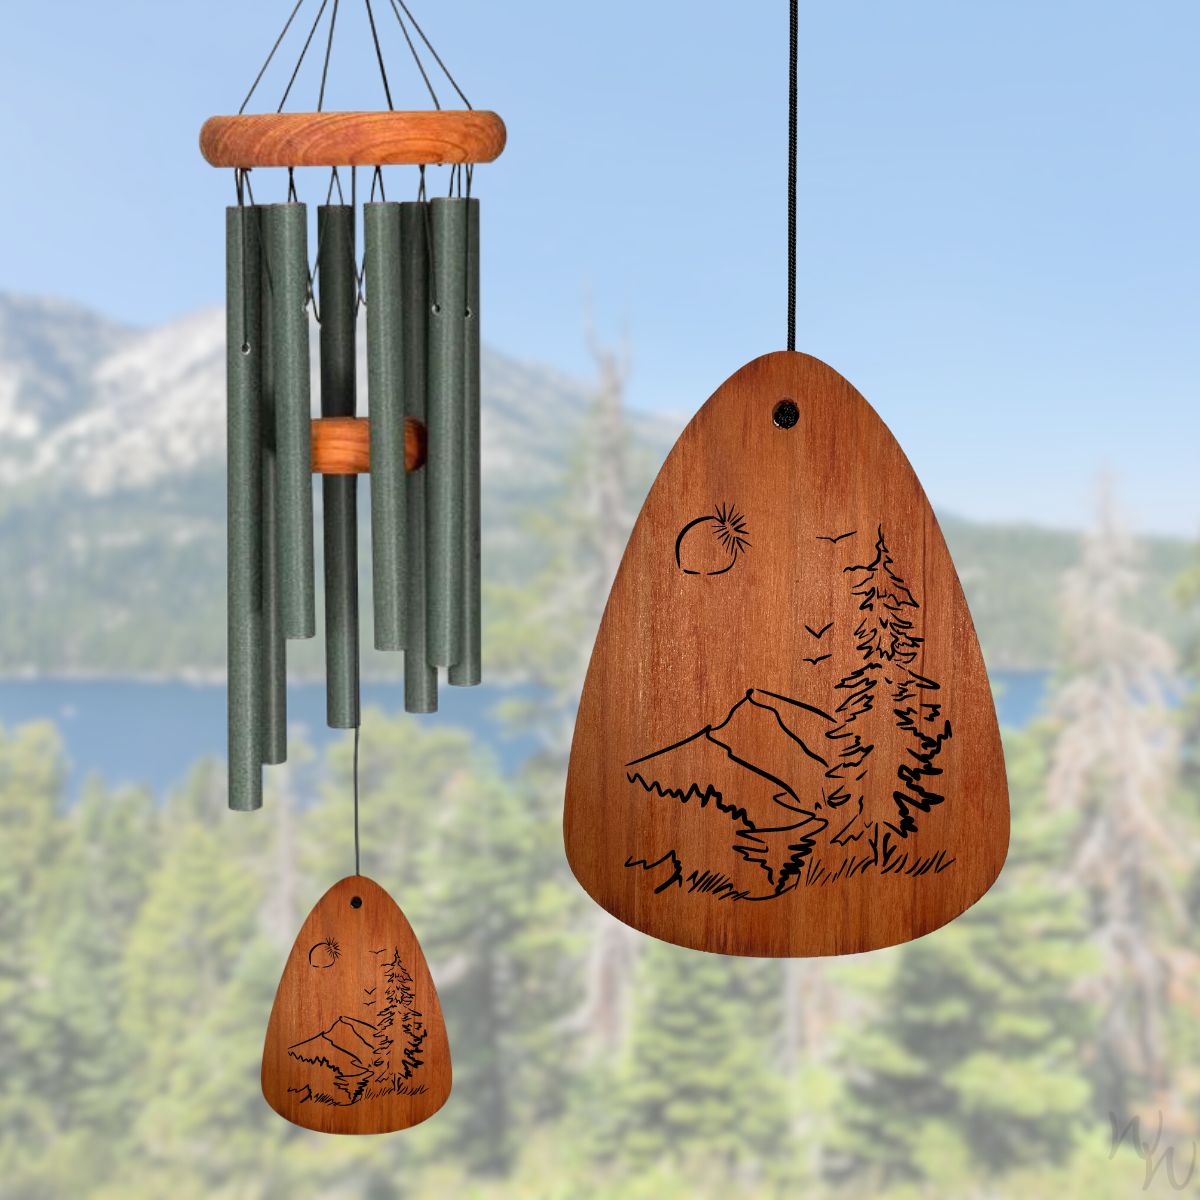 Festival 24-inch 8-Tube Wind chime in Forest Green - Mountain